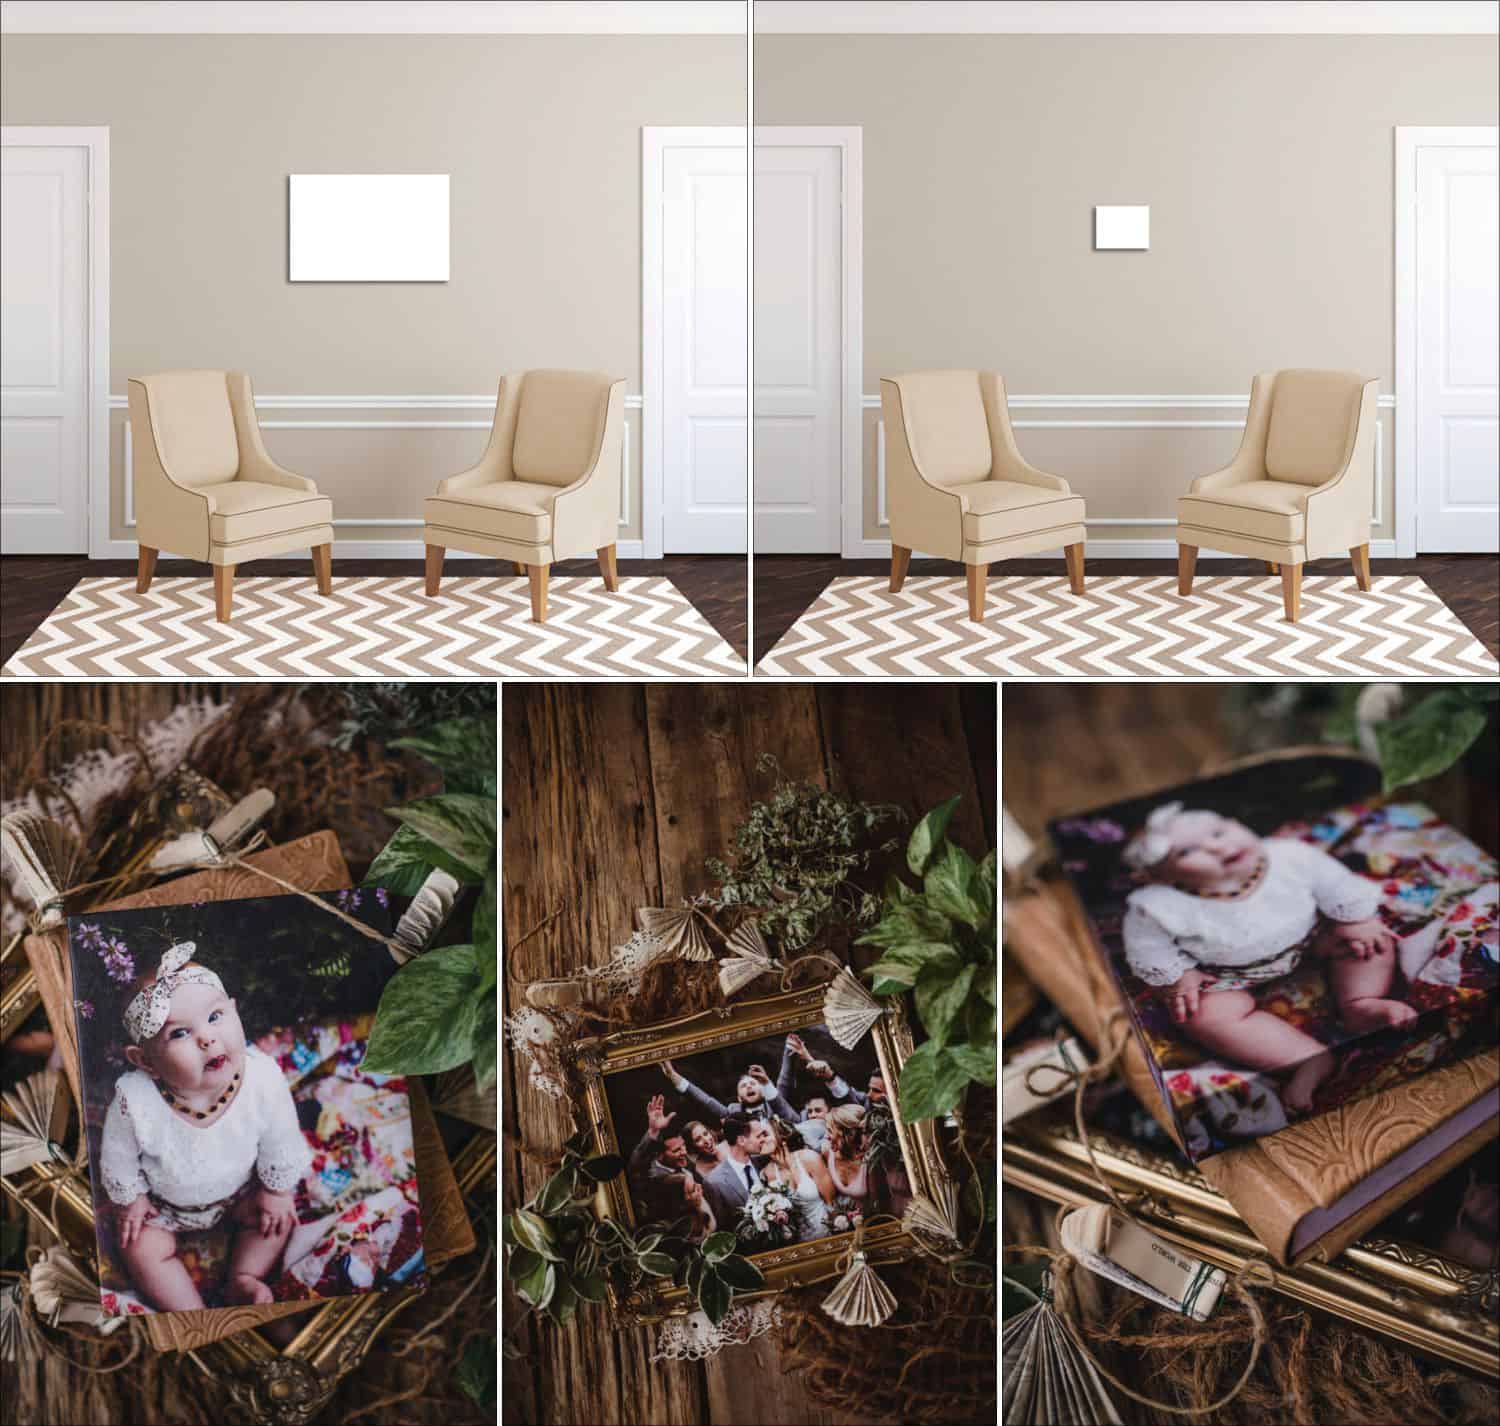 Twig & Olive's sample product images showing their canvases, frames, albums, and print sizes.